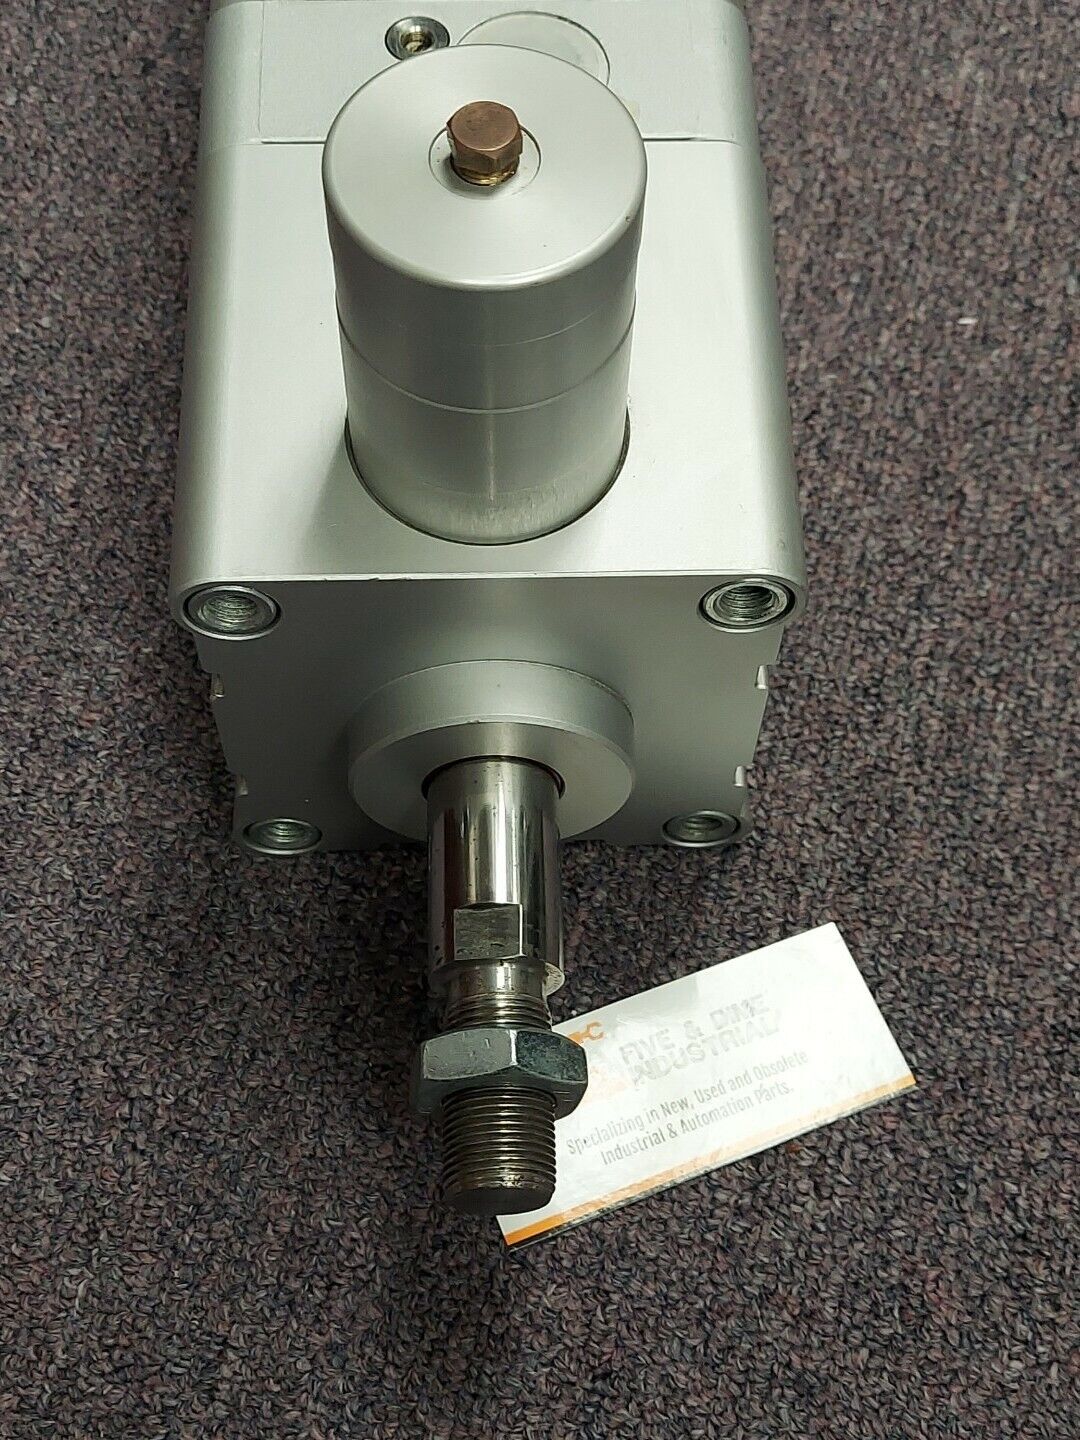 Festo DNC-100-400-PPV-A-K3-KP New Pneumatic Cylinder with Clamping Attach(OV105)